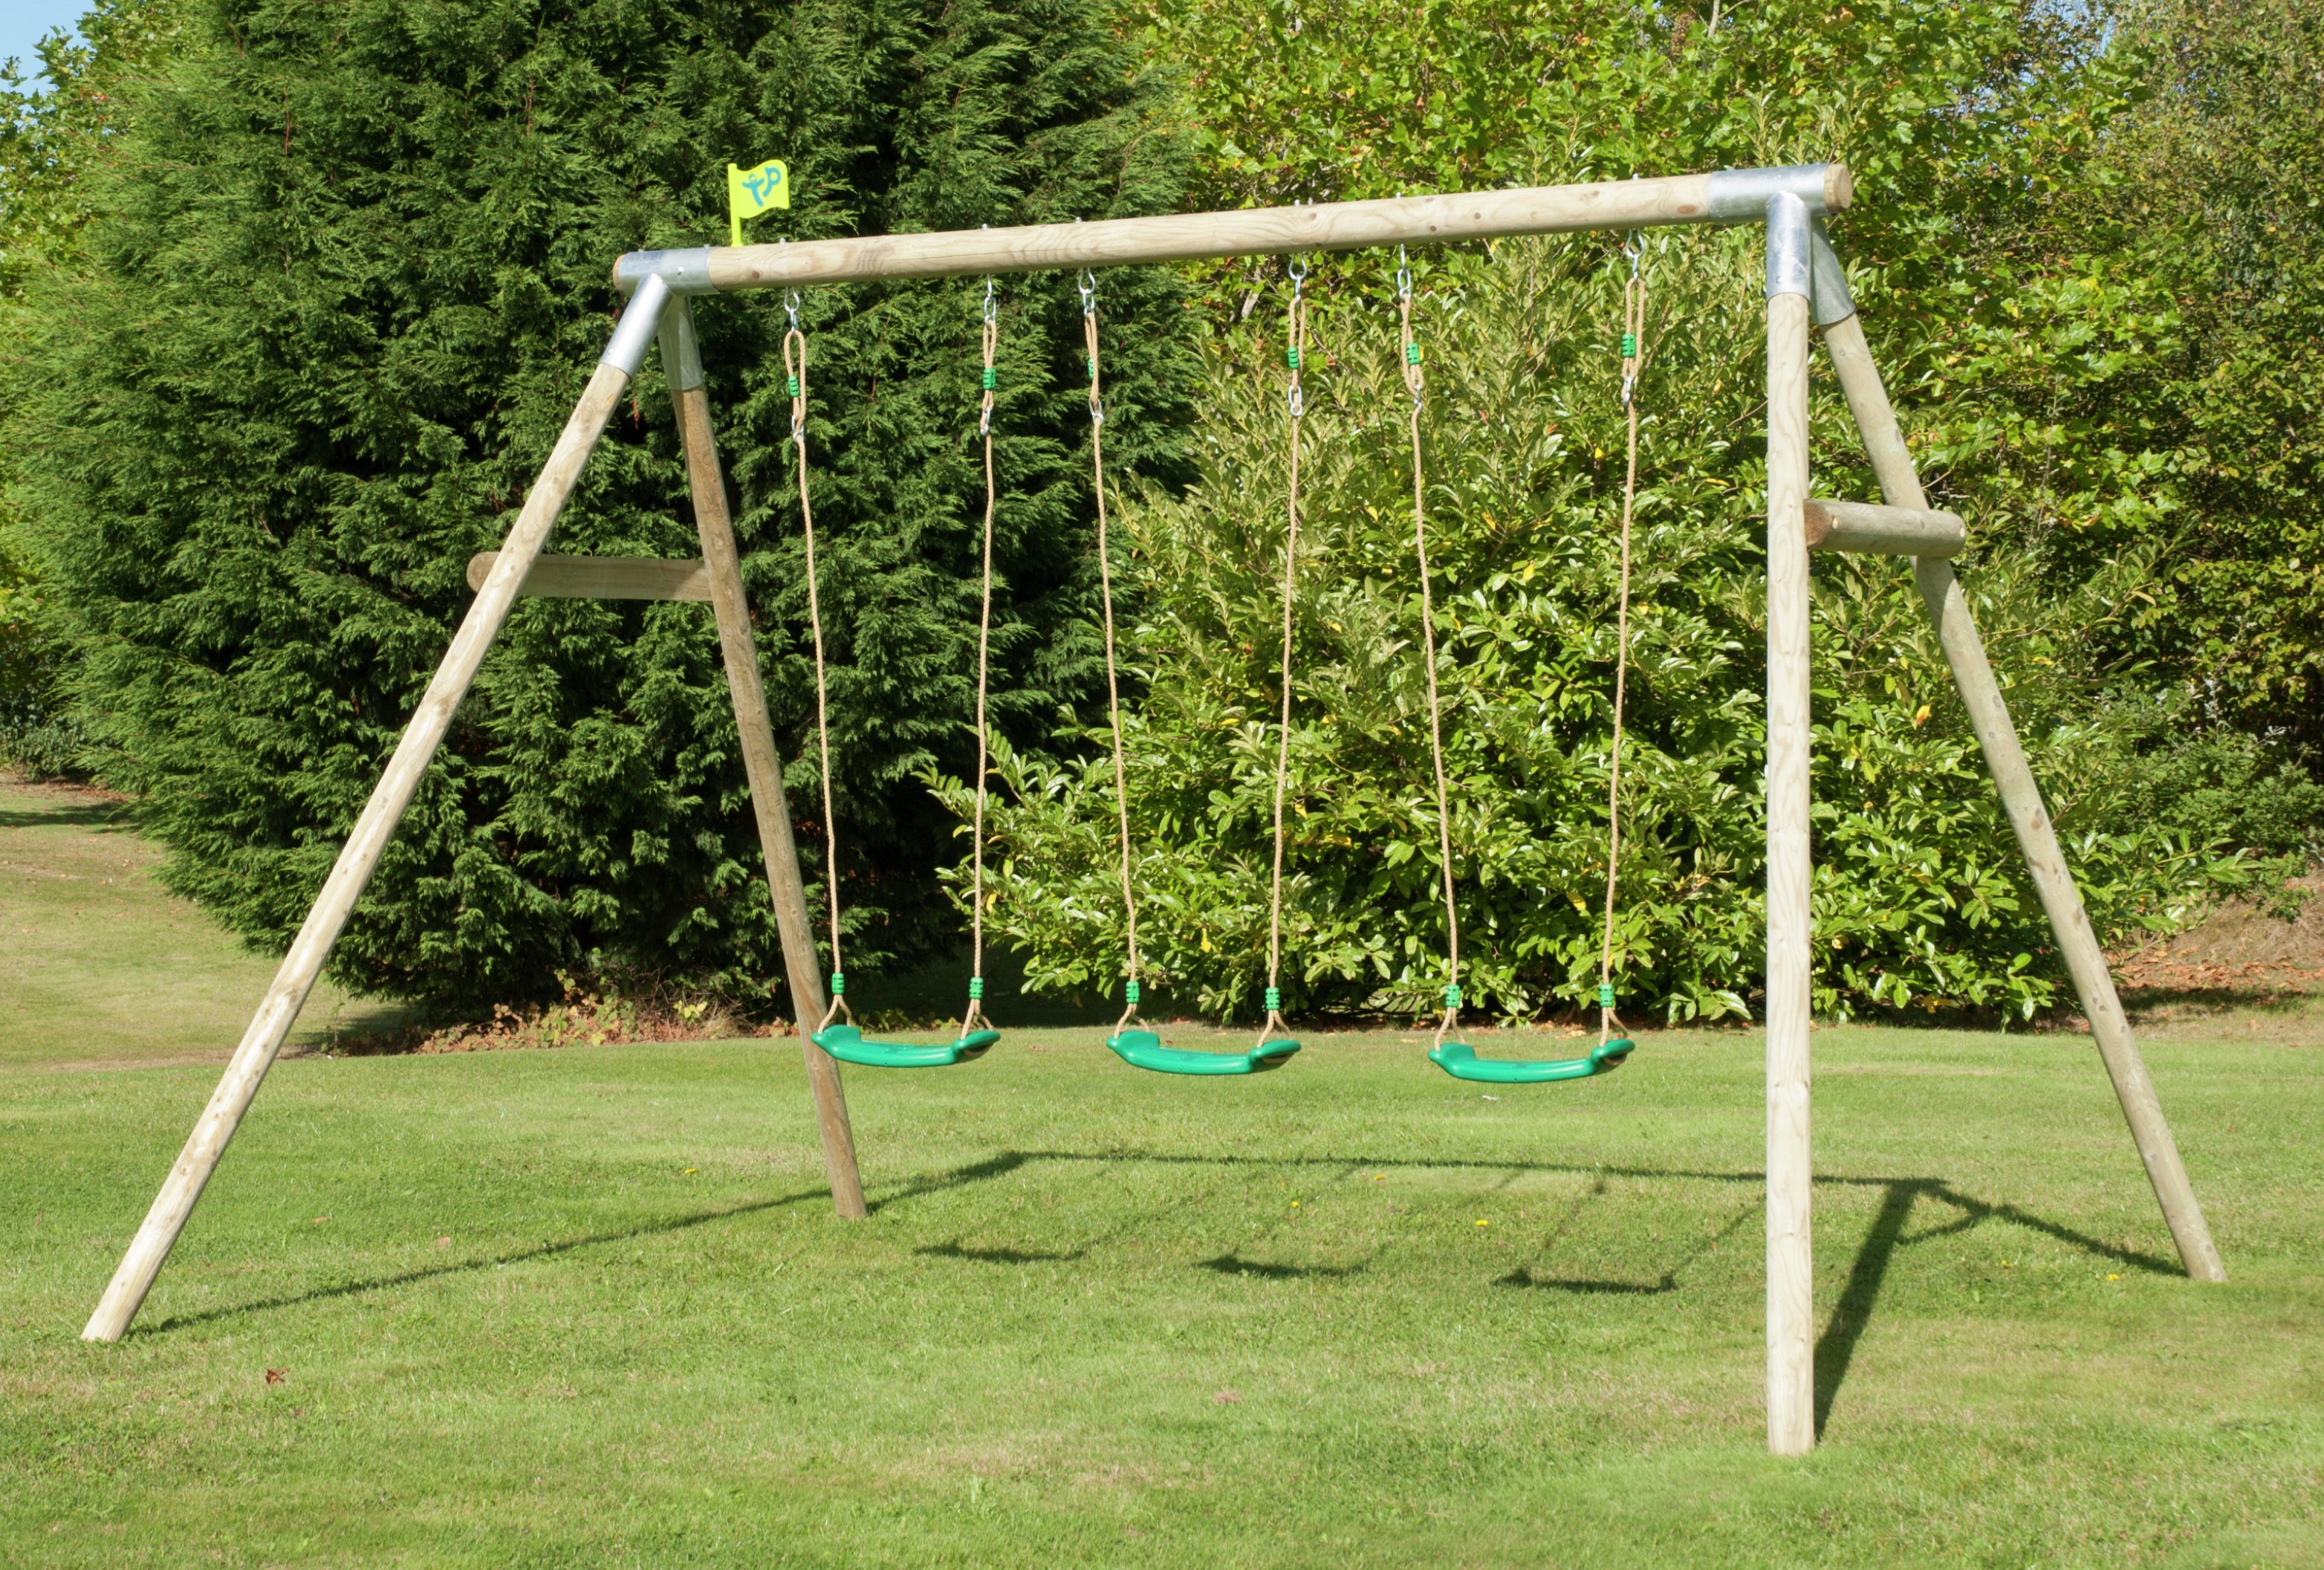 TP Toys Knightwood Triple Roundwood Swing Frame. Review